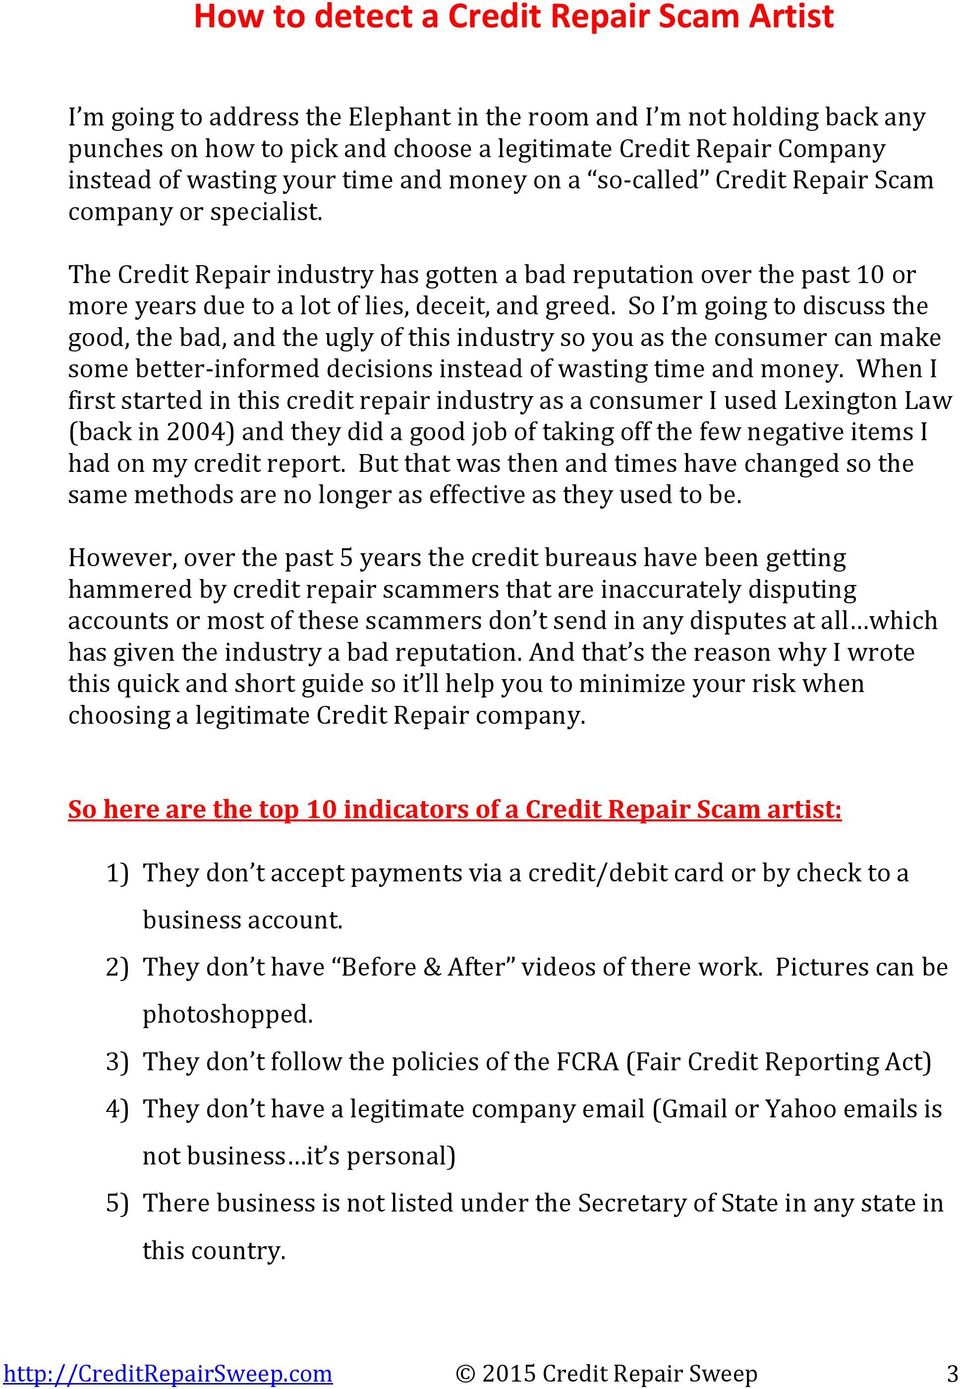 The Credit Repair industry has gotten a bad reputation over the past 10 or more years due to a lot of lies, deceit, and greed.